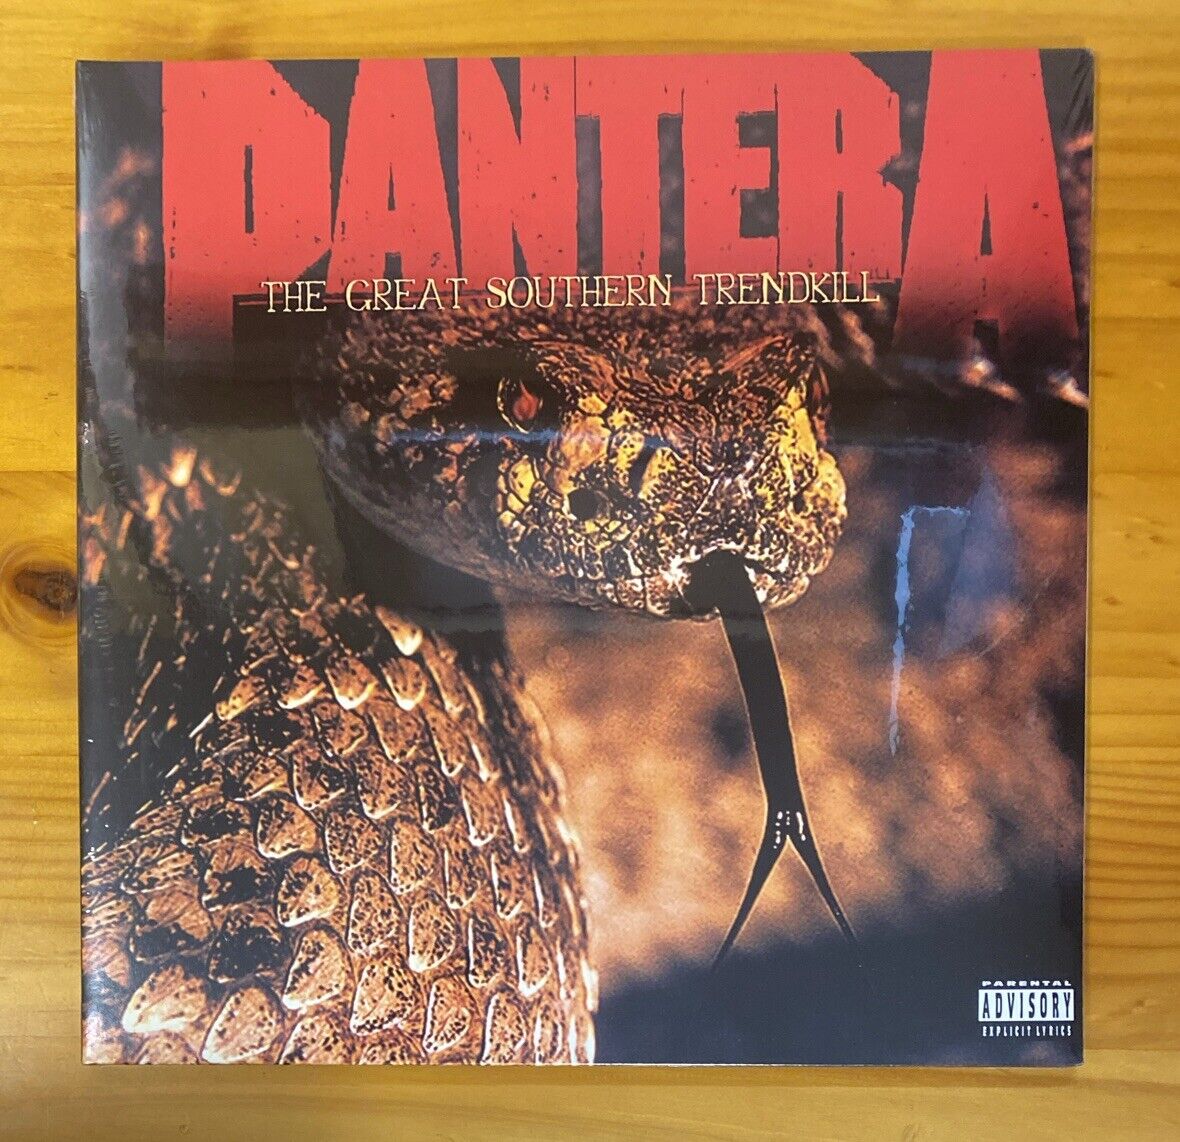 Pantera - The Great Southern Trendkill , 2020 - 2xLP With 11 Tracks, Sealed, M/M